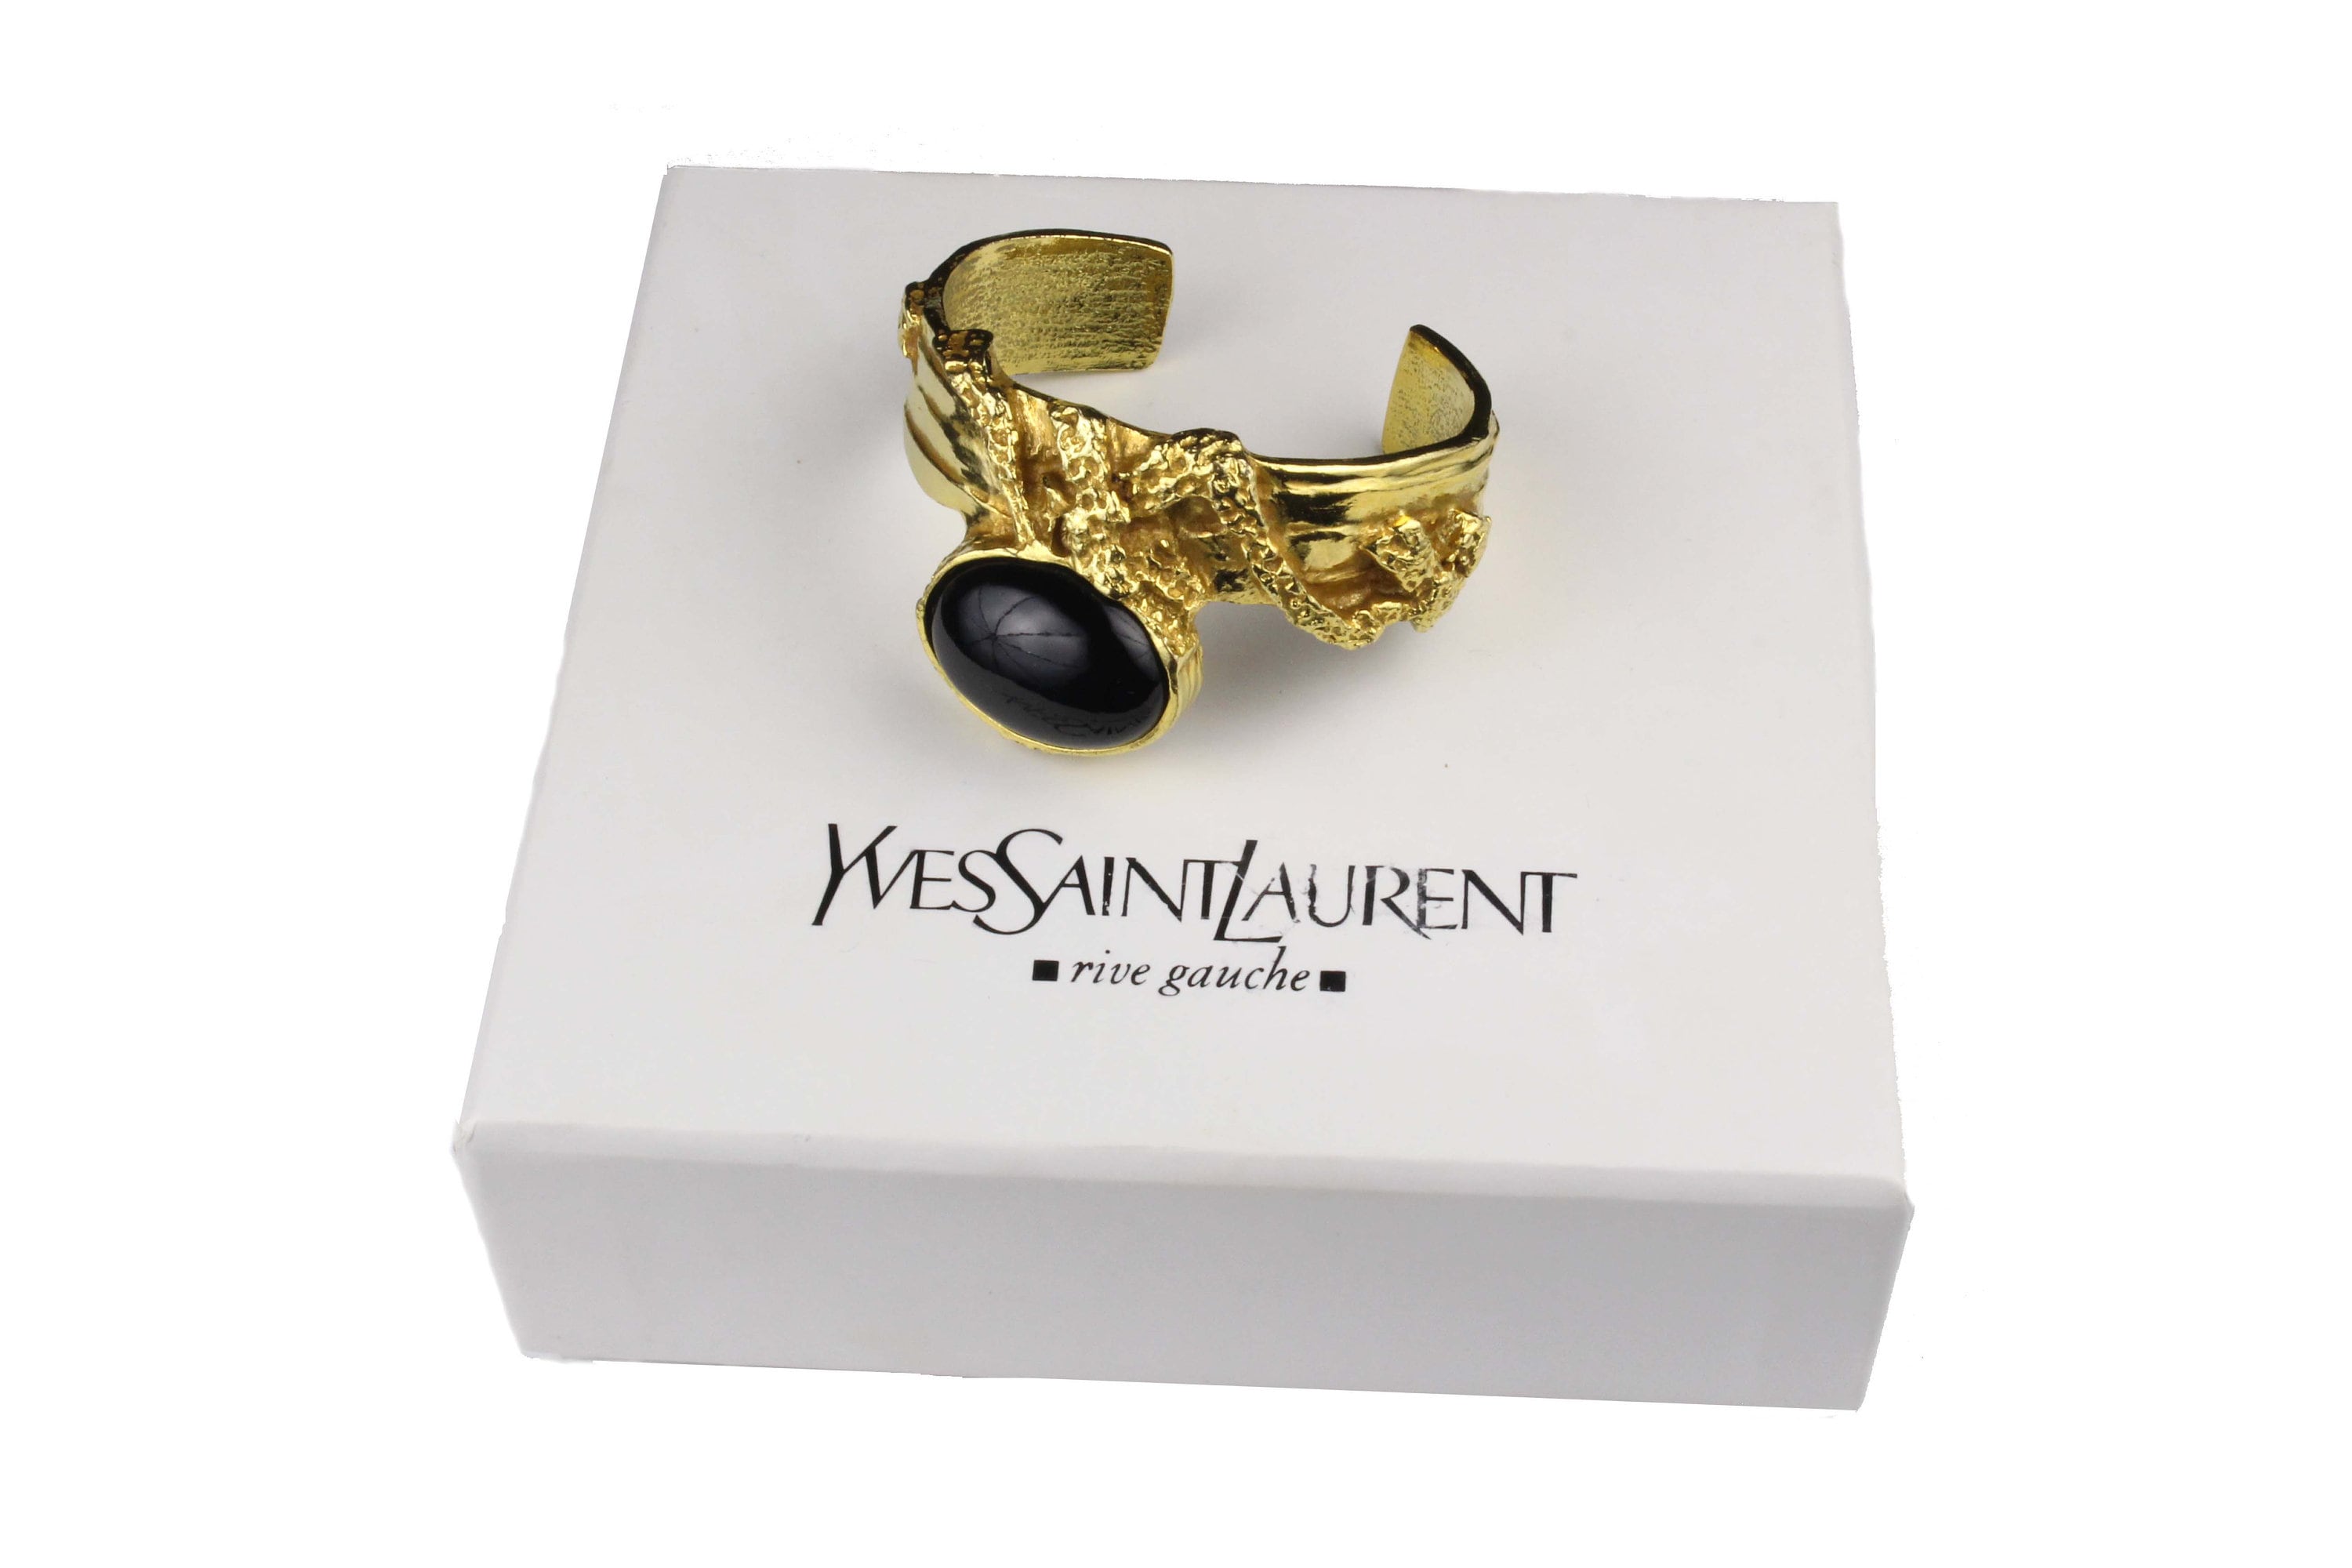 YVES SAINT LAURENT, ring, gold patinated metal, original dust bag and box  included. Vintage clothing & Accessories - Auctionet